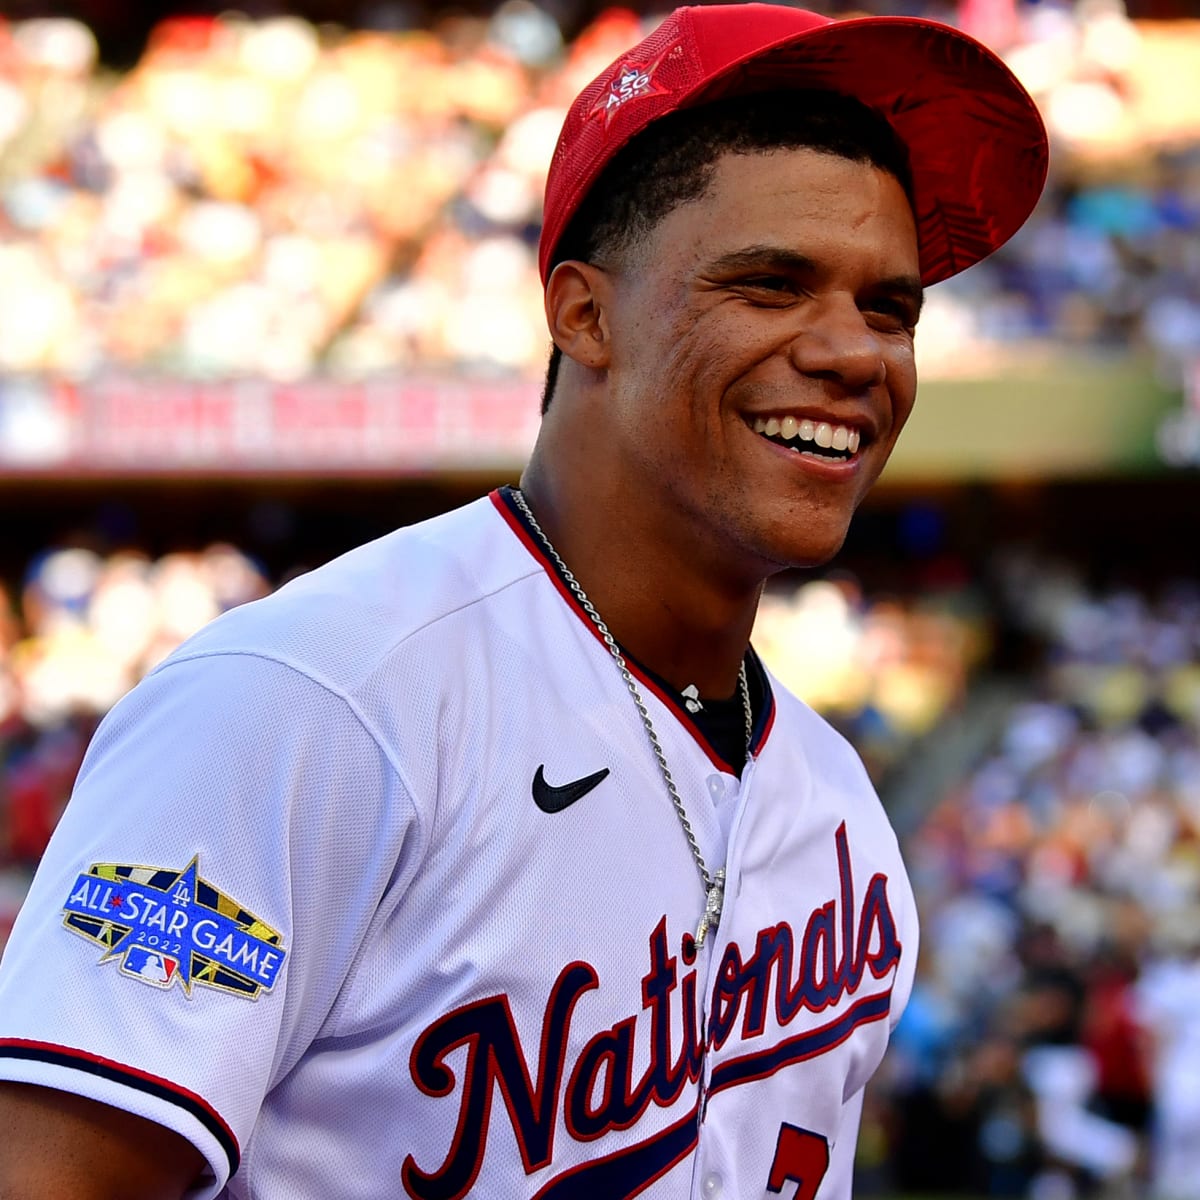 Juan Soto, at 20 years old, is already making World Series history